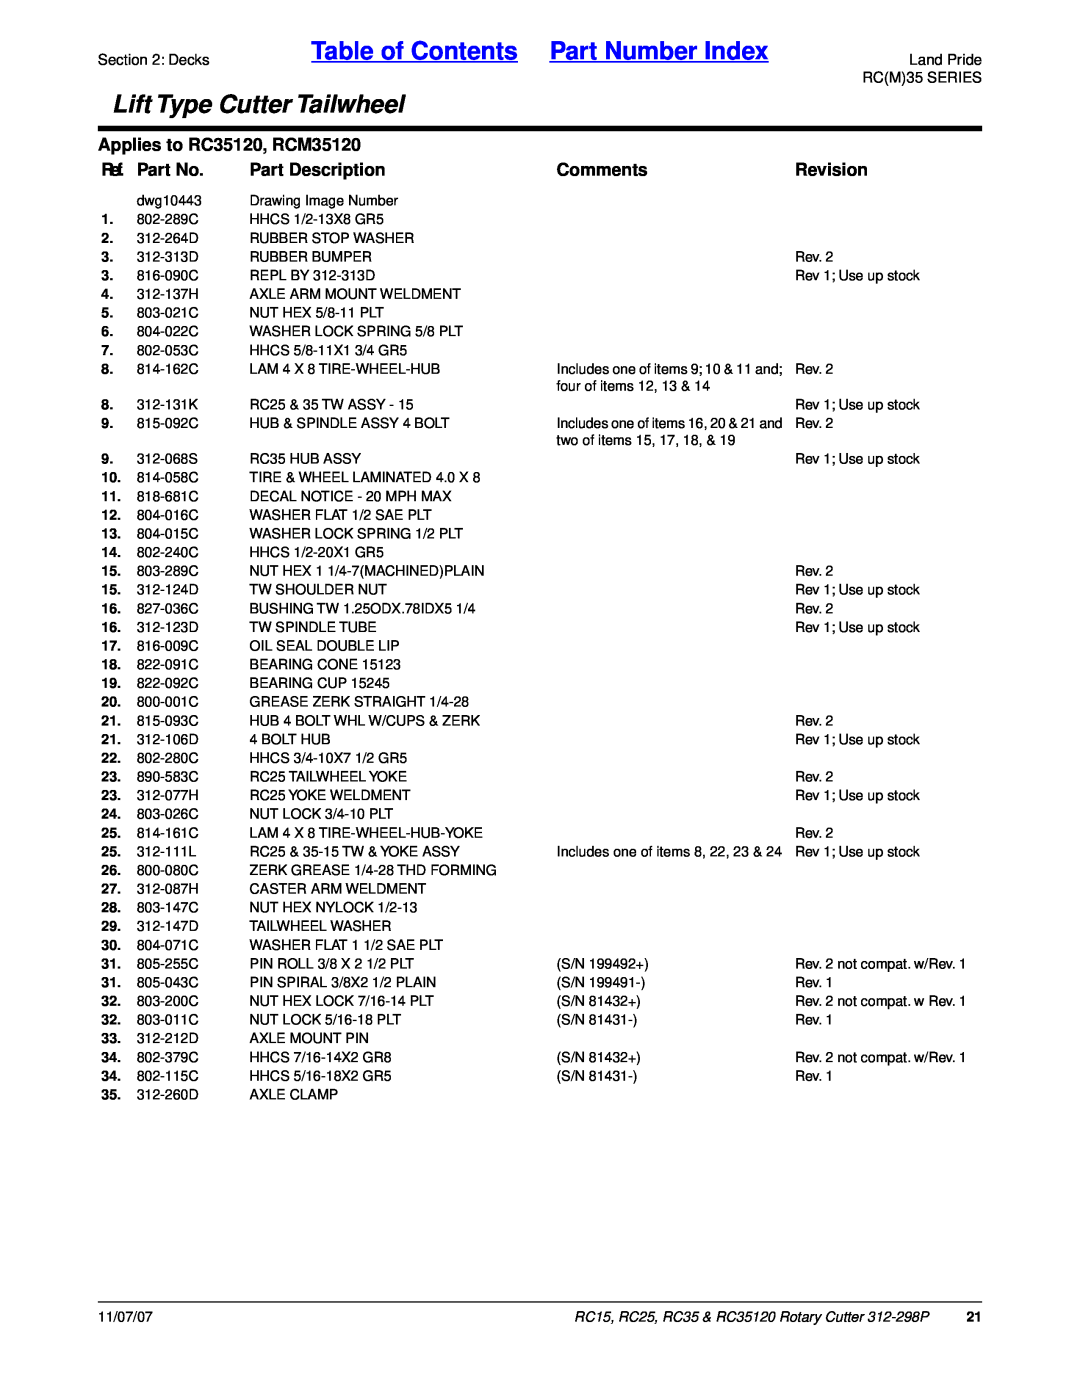 Land Pride Table of Contents Part Number Index, Lift Type Cutter Tailwheel, Applies to RC35120, RCM35120, Ref. Part No 